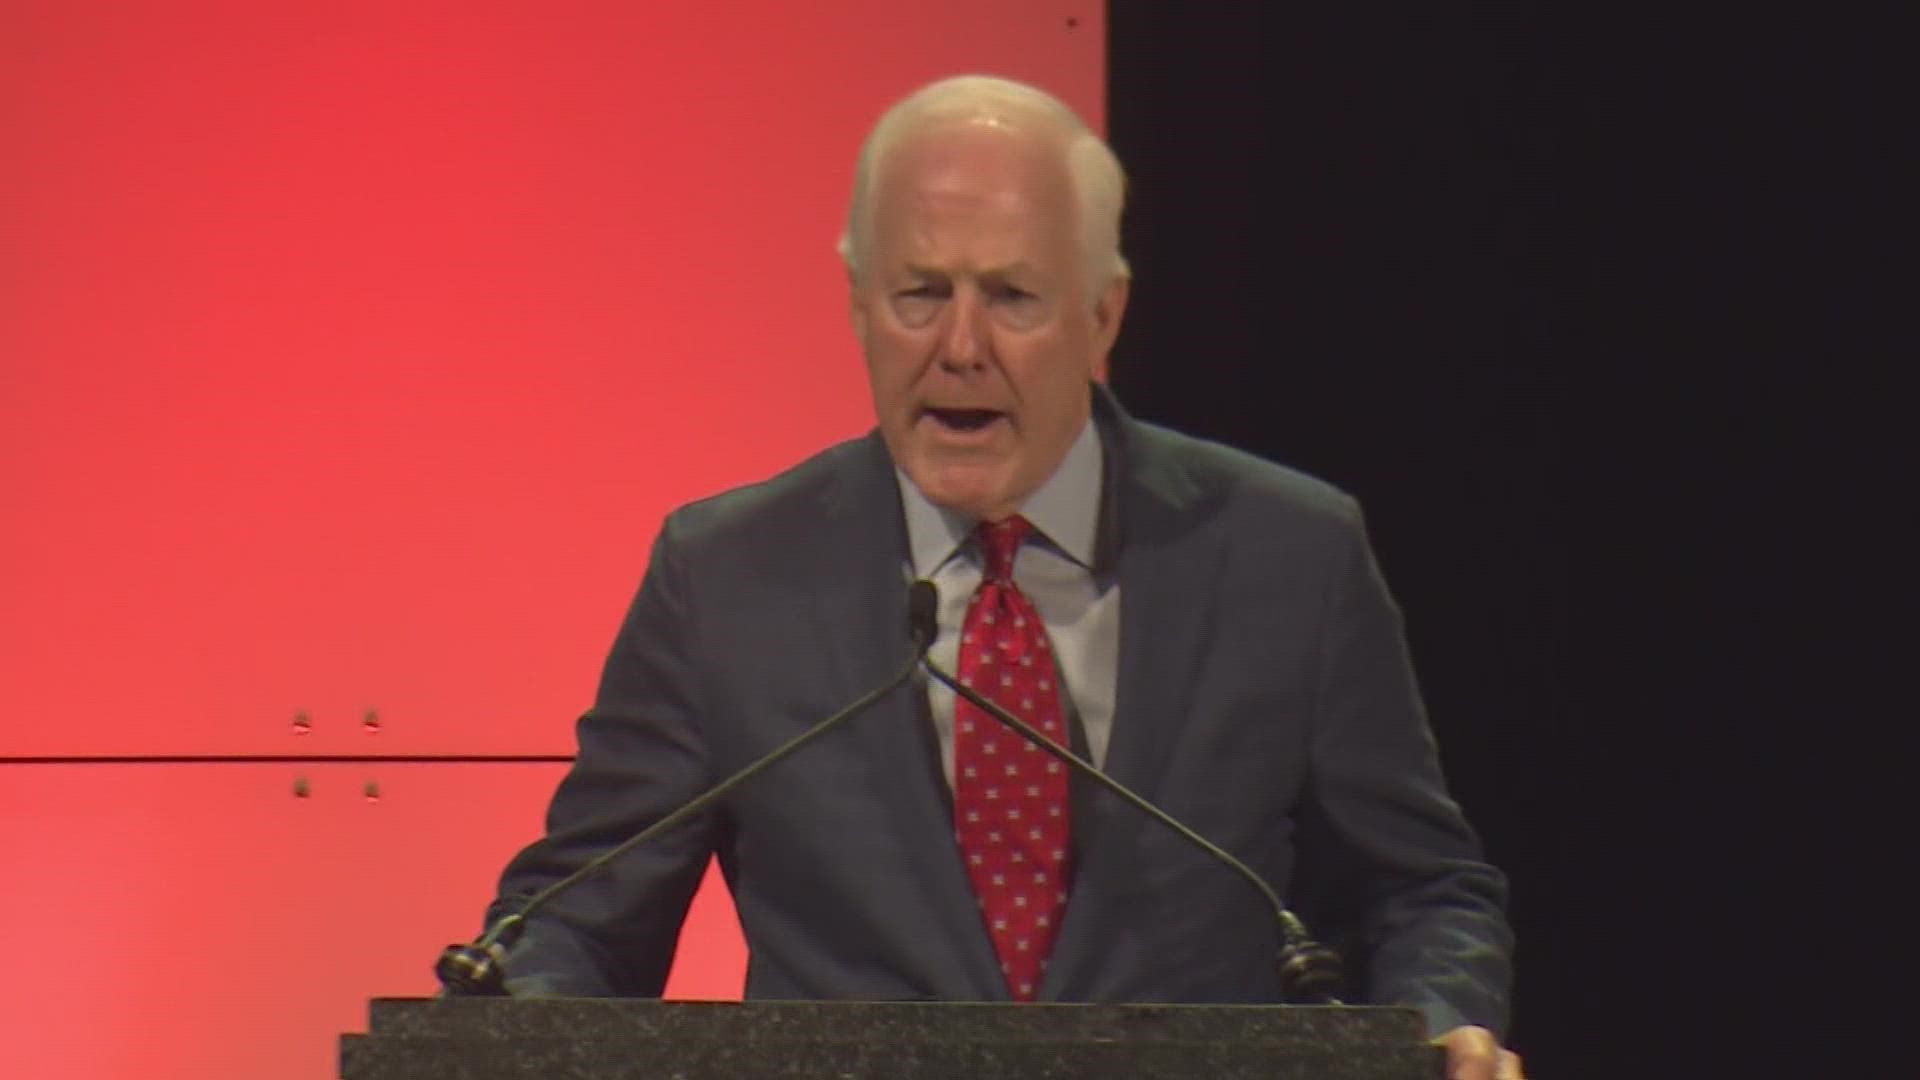 Sen. John Cornyn got a Texas-sized welcome at the Texas GOP in Houston Friday, but it was not the reaction he had hoped for.